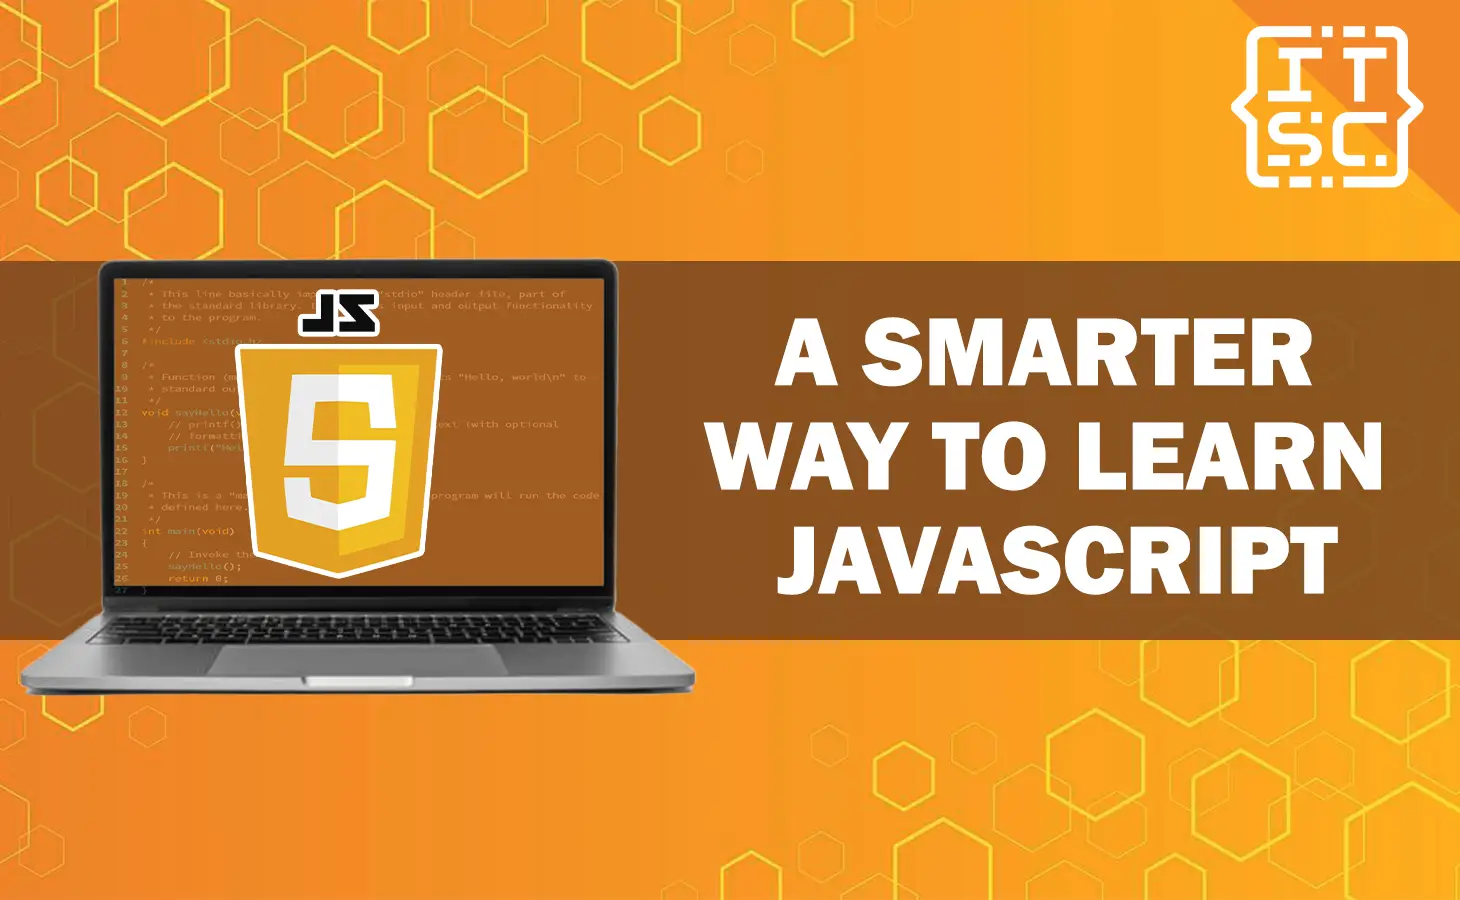 A smarter way to learn JavaScript: 15 Quick Learning Methods